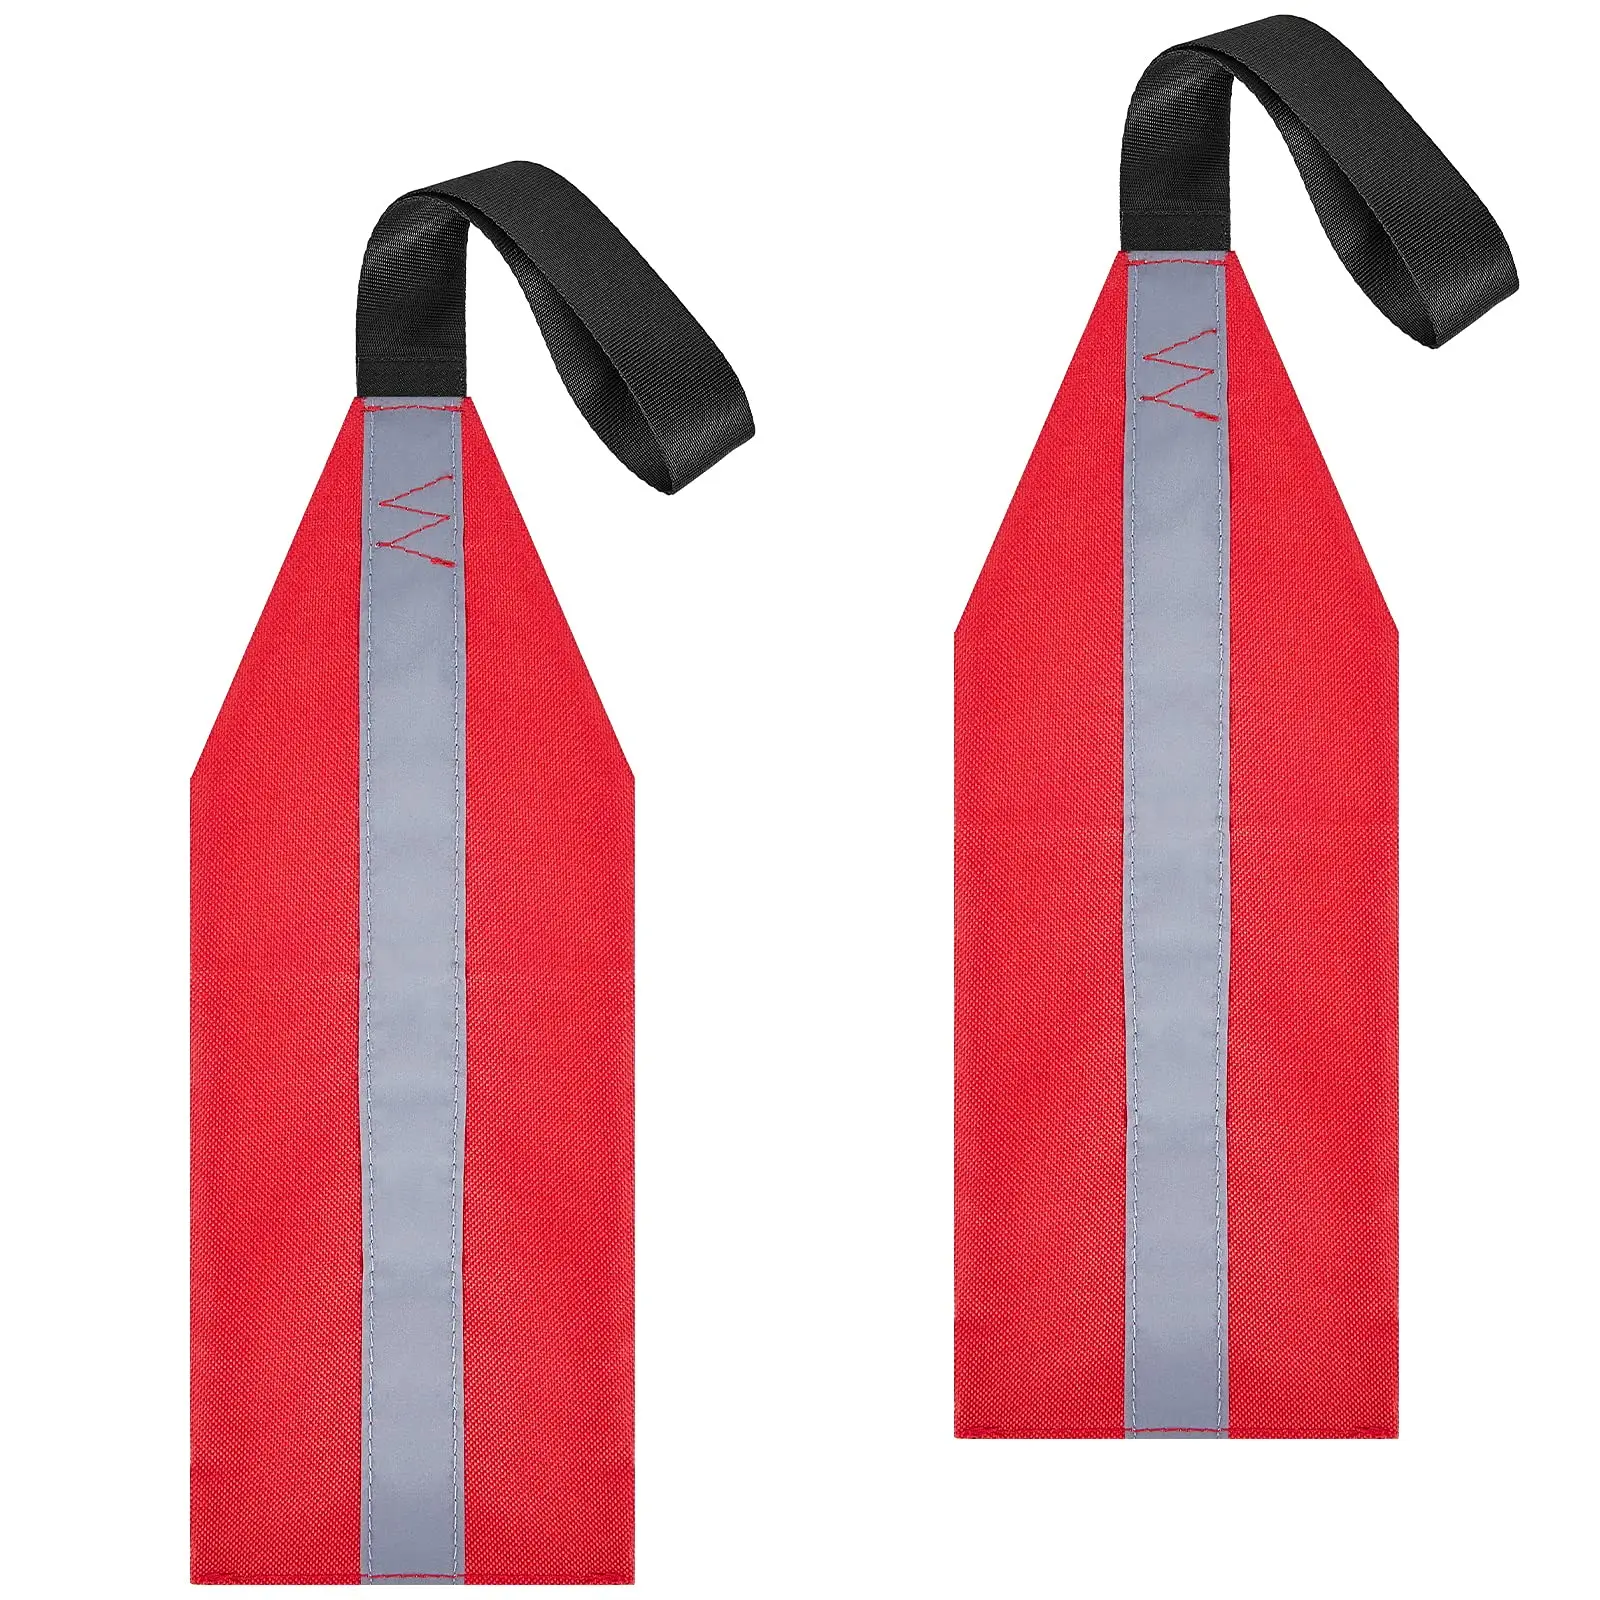 

2 Pieces Safety Travel Flag for Kayak Canoe Red Warning Flag with Webbing for Kayak SUP Towing Canoes Truck Safety Accessories